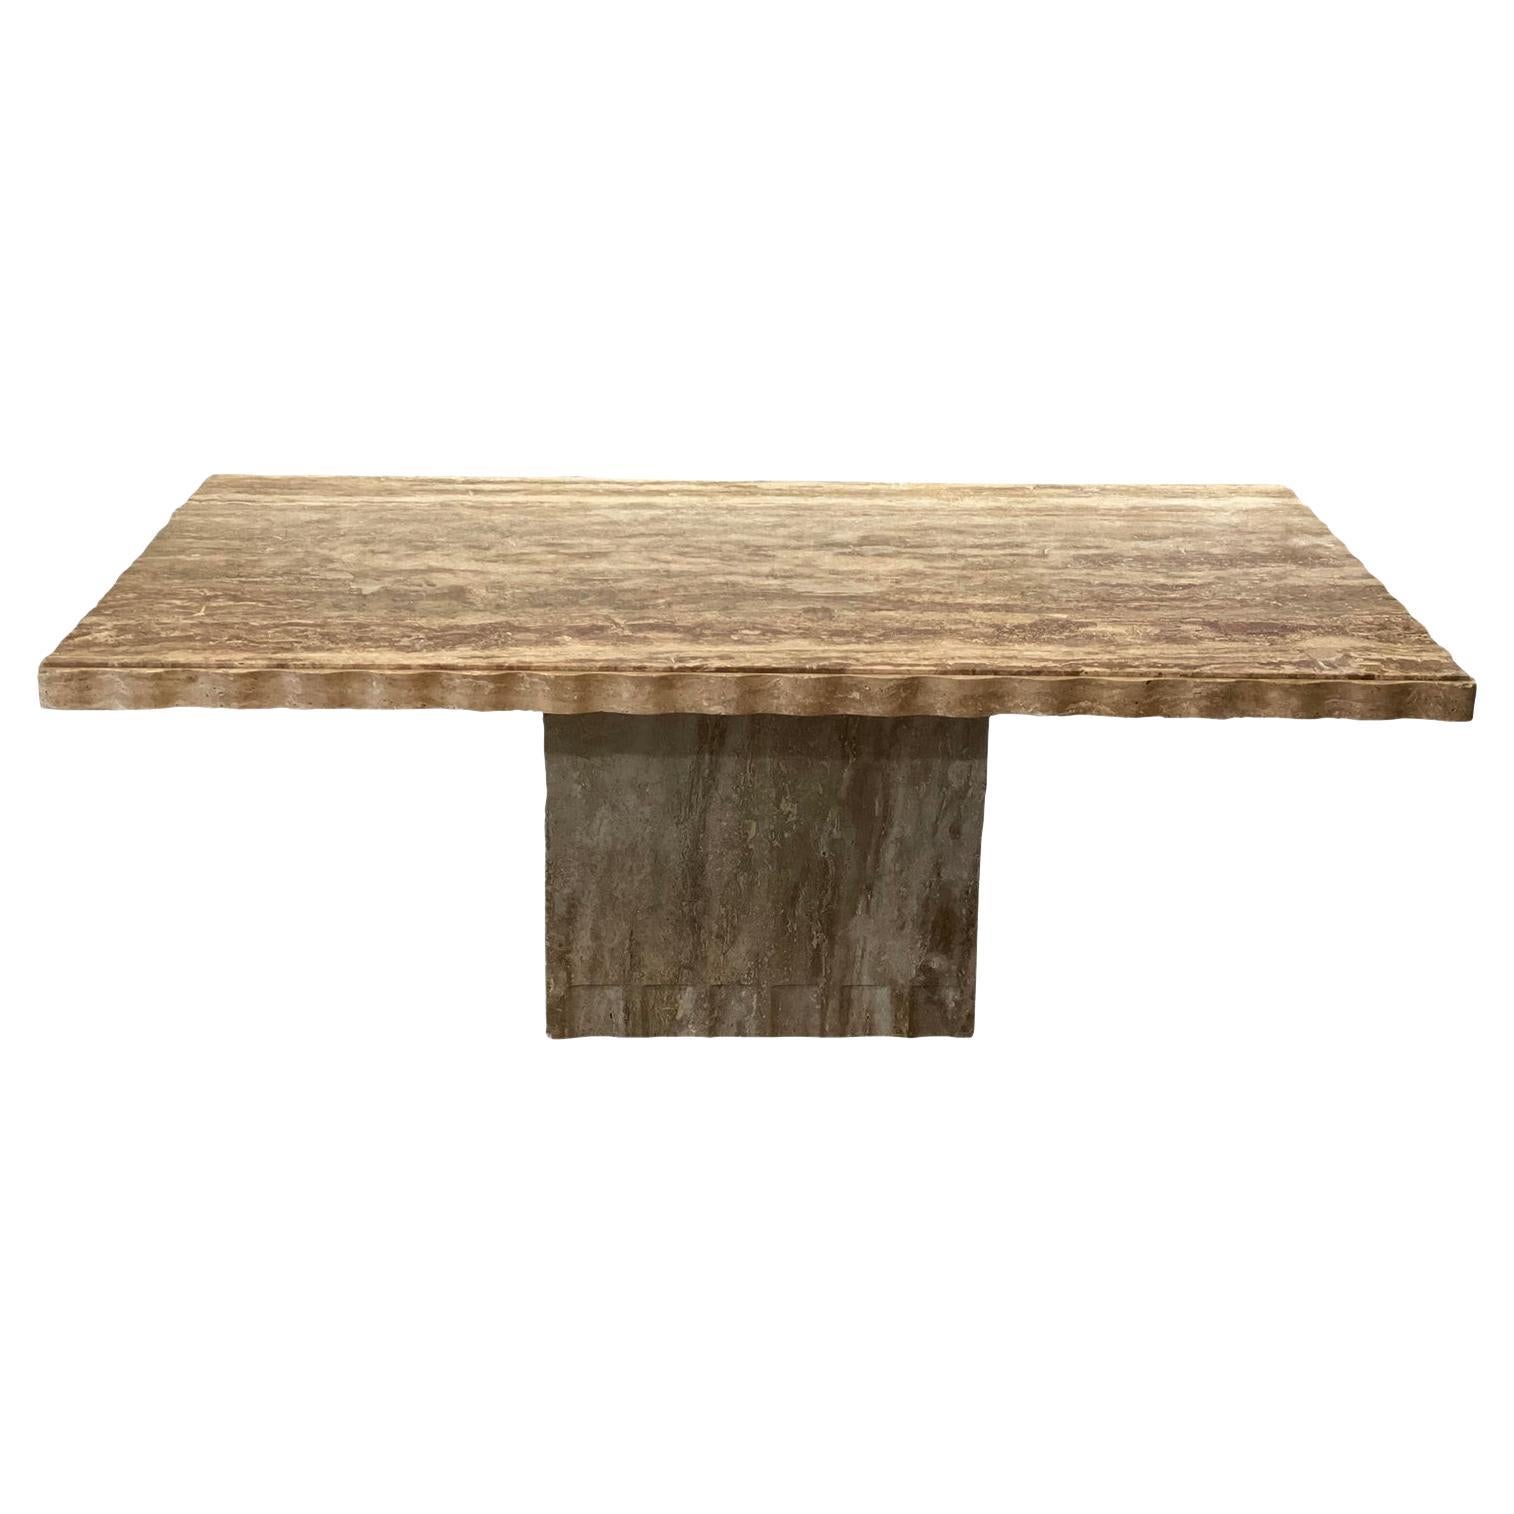 1980s Postmodern Walnut Travertine Dining Table with Scalloped Edge